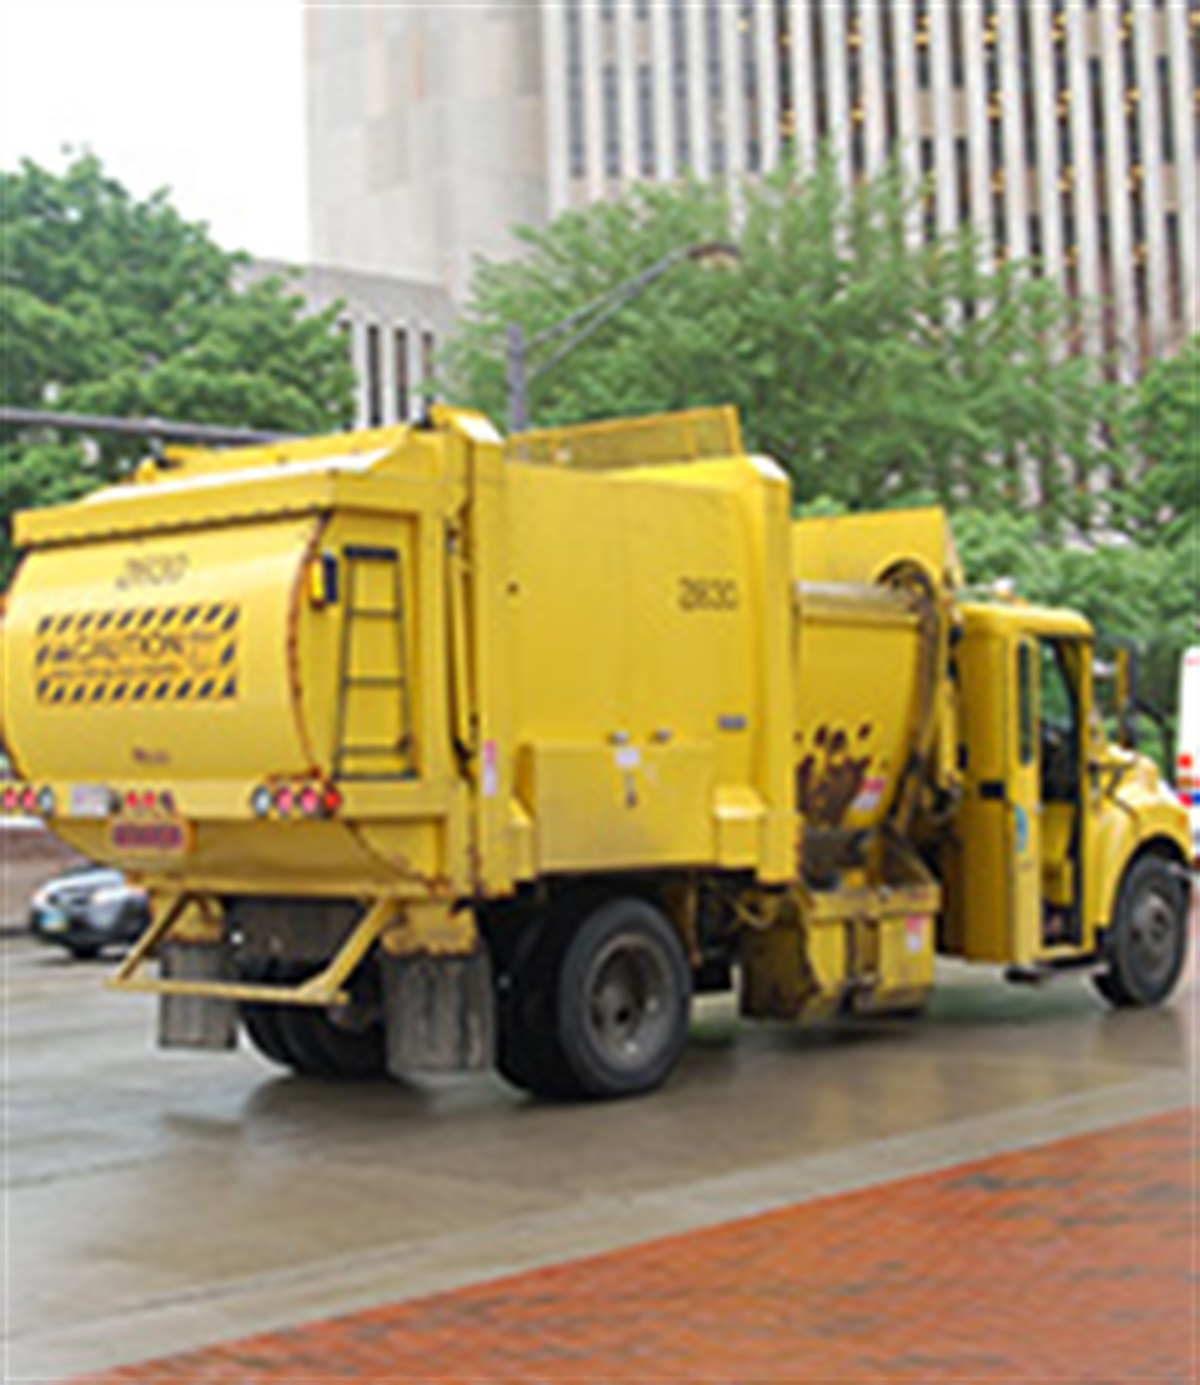 https://new.columbus.gov/files/sharedassets/city/v/1/services/trash-recycling-amp-bulk-collection/refuse_collection_alt_pic195px.jpg?w=1200